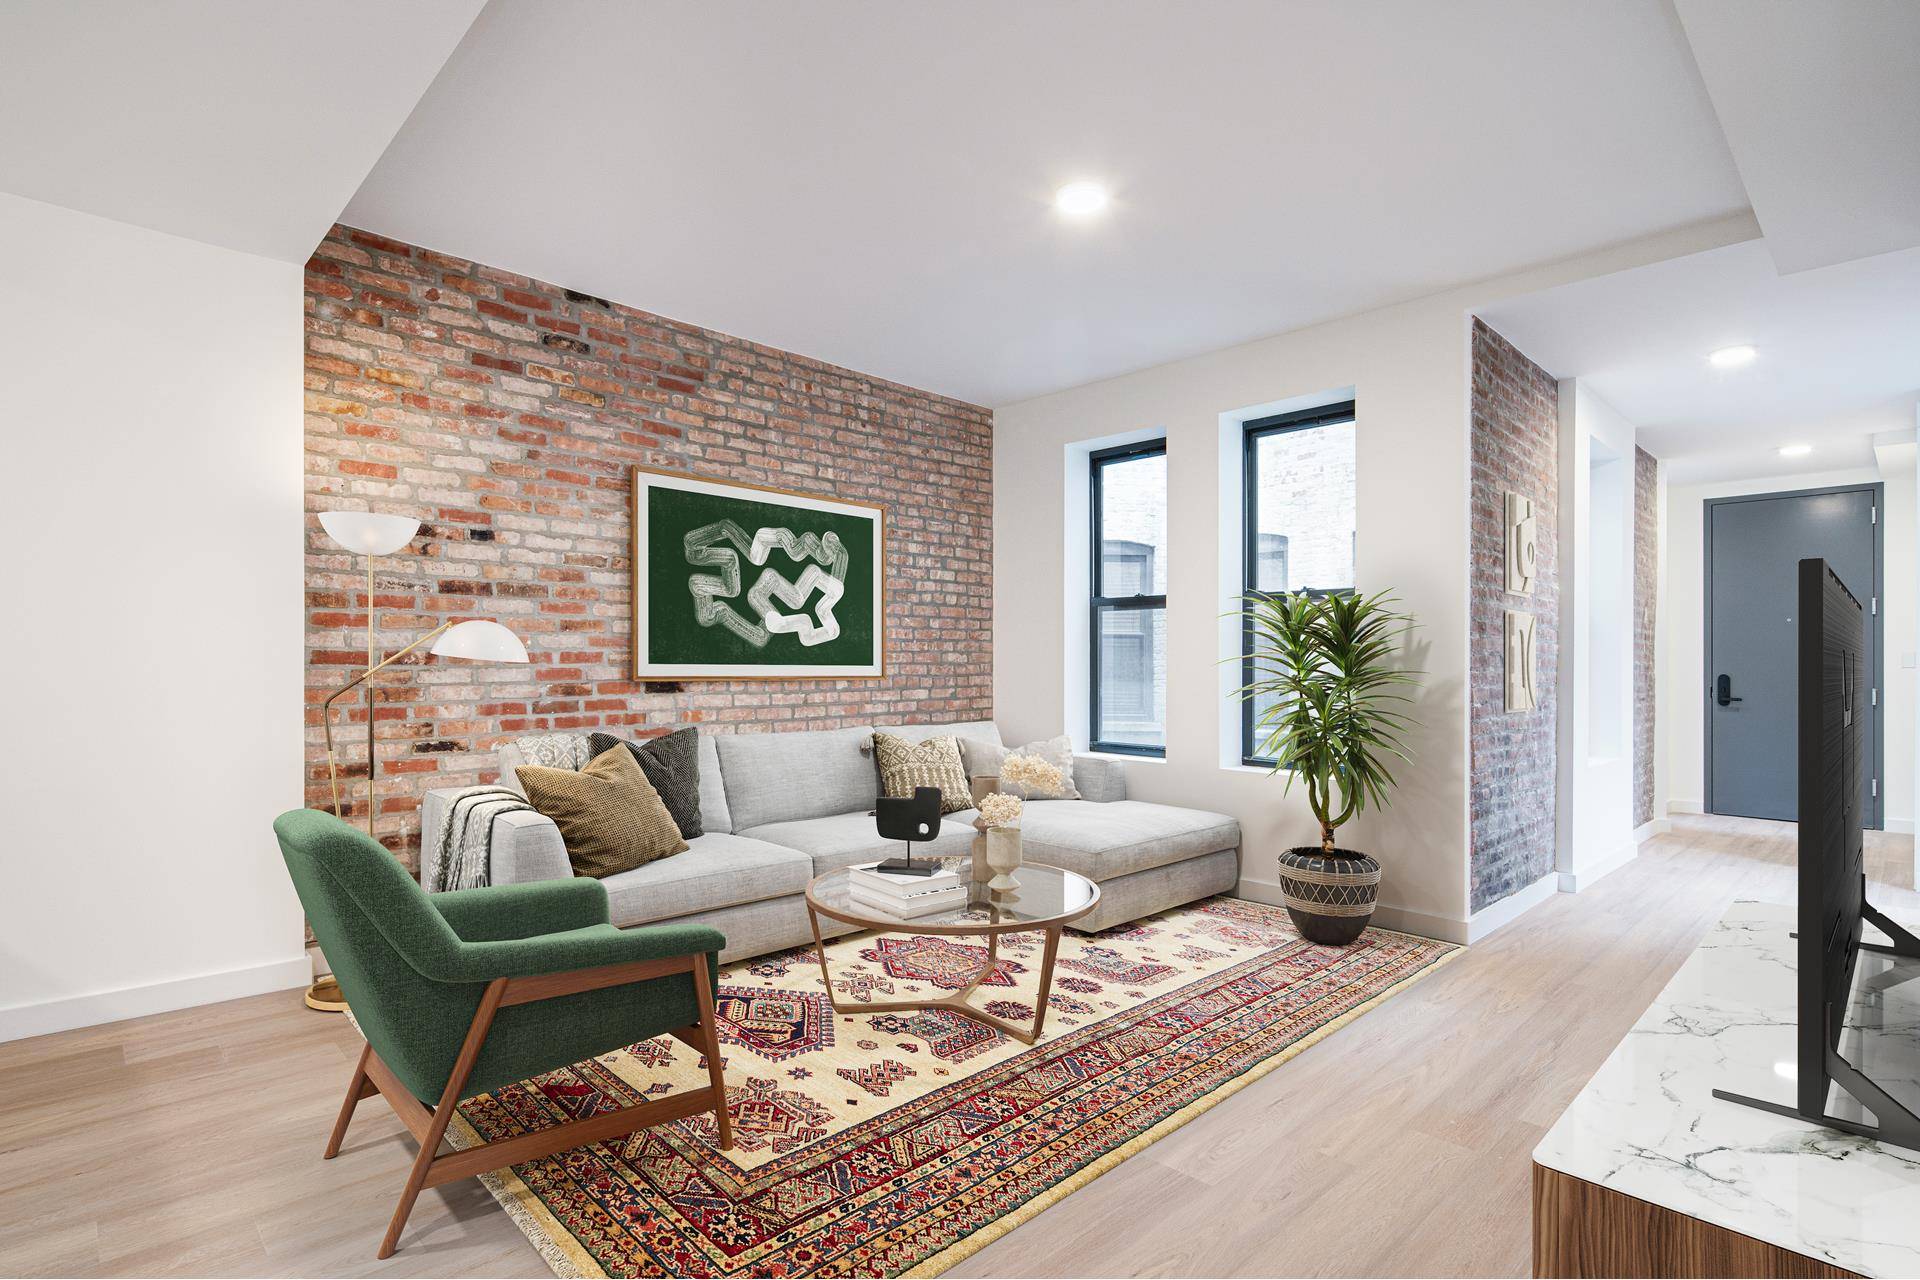 Welcome to 469 7th avenue, a collection of 8 carefully curated residences in the heart of Park Slope.